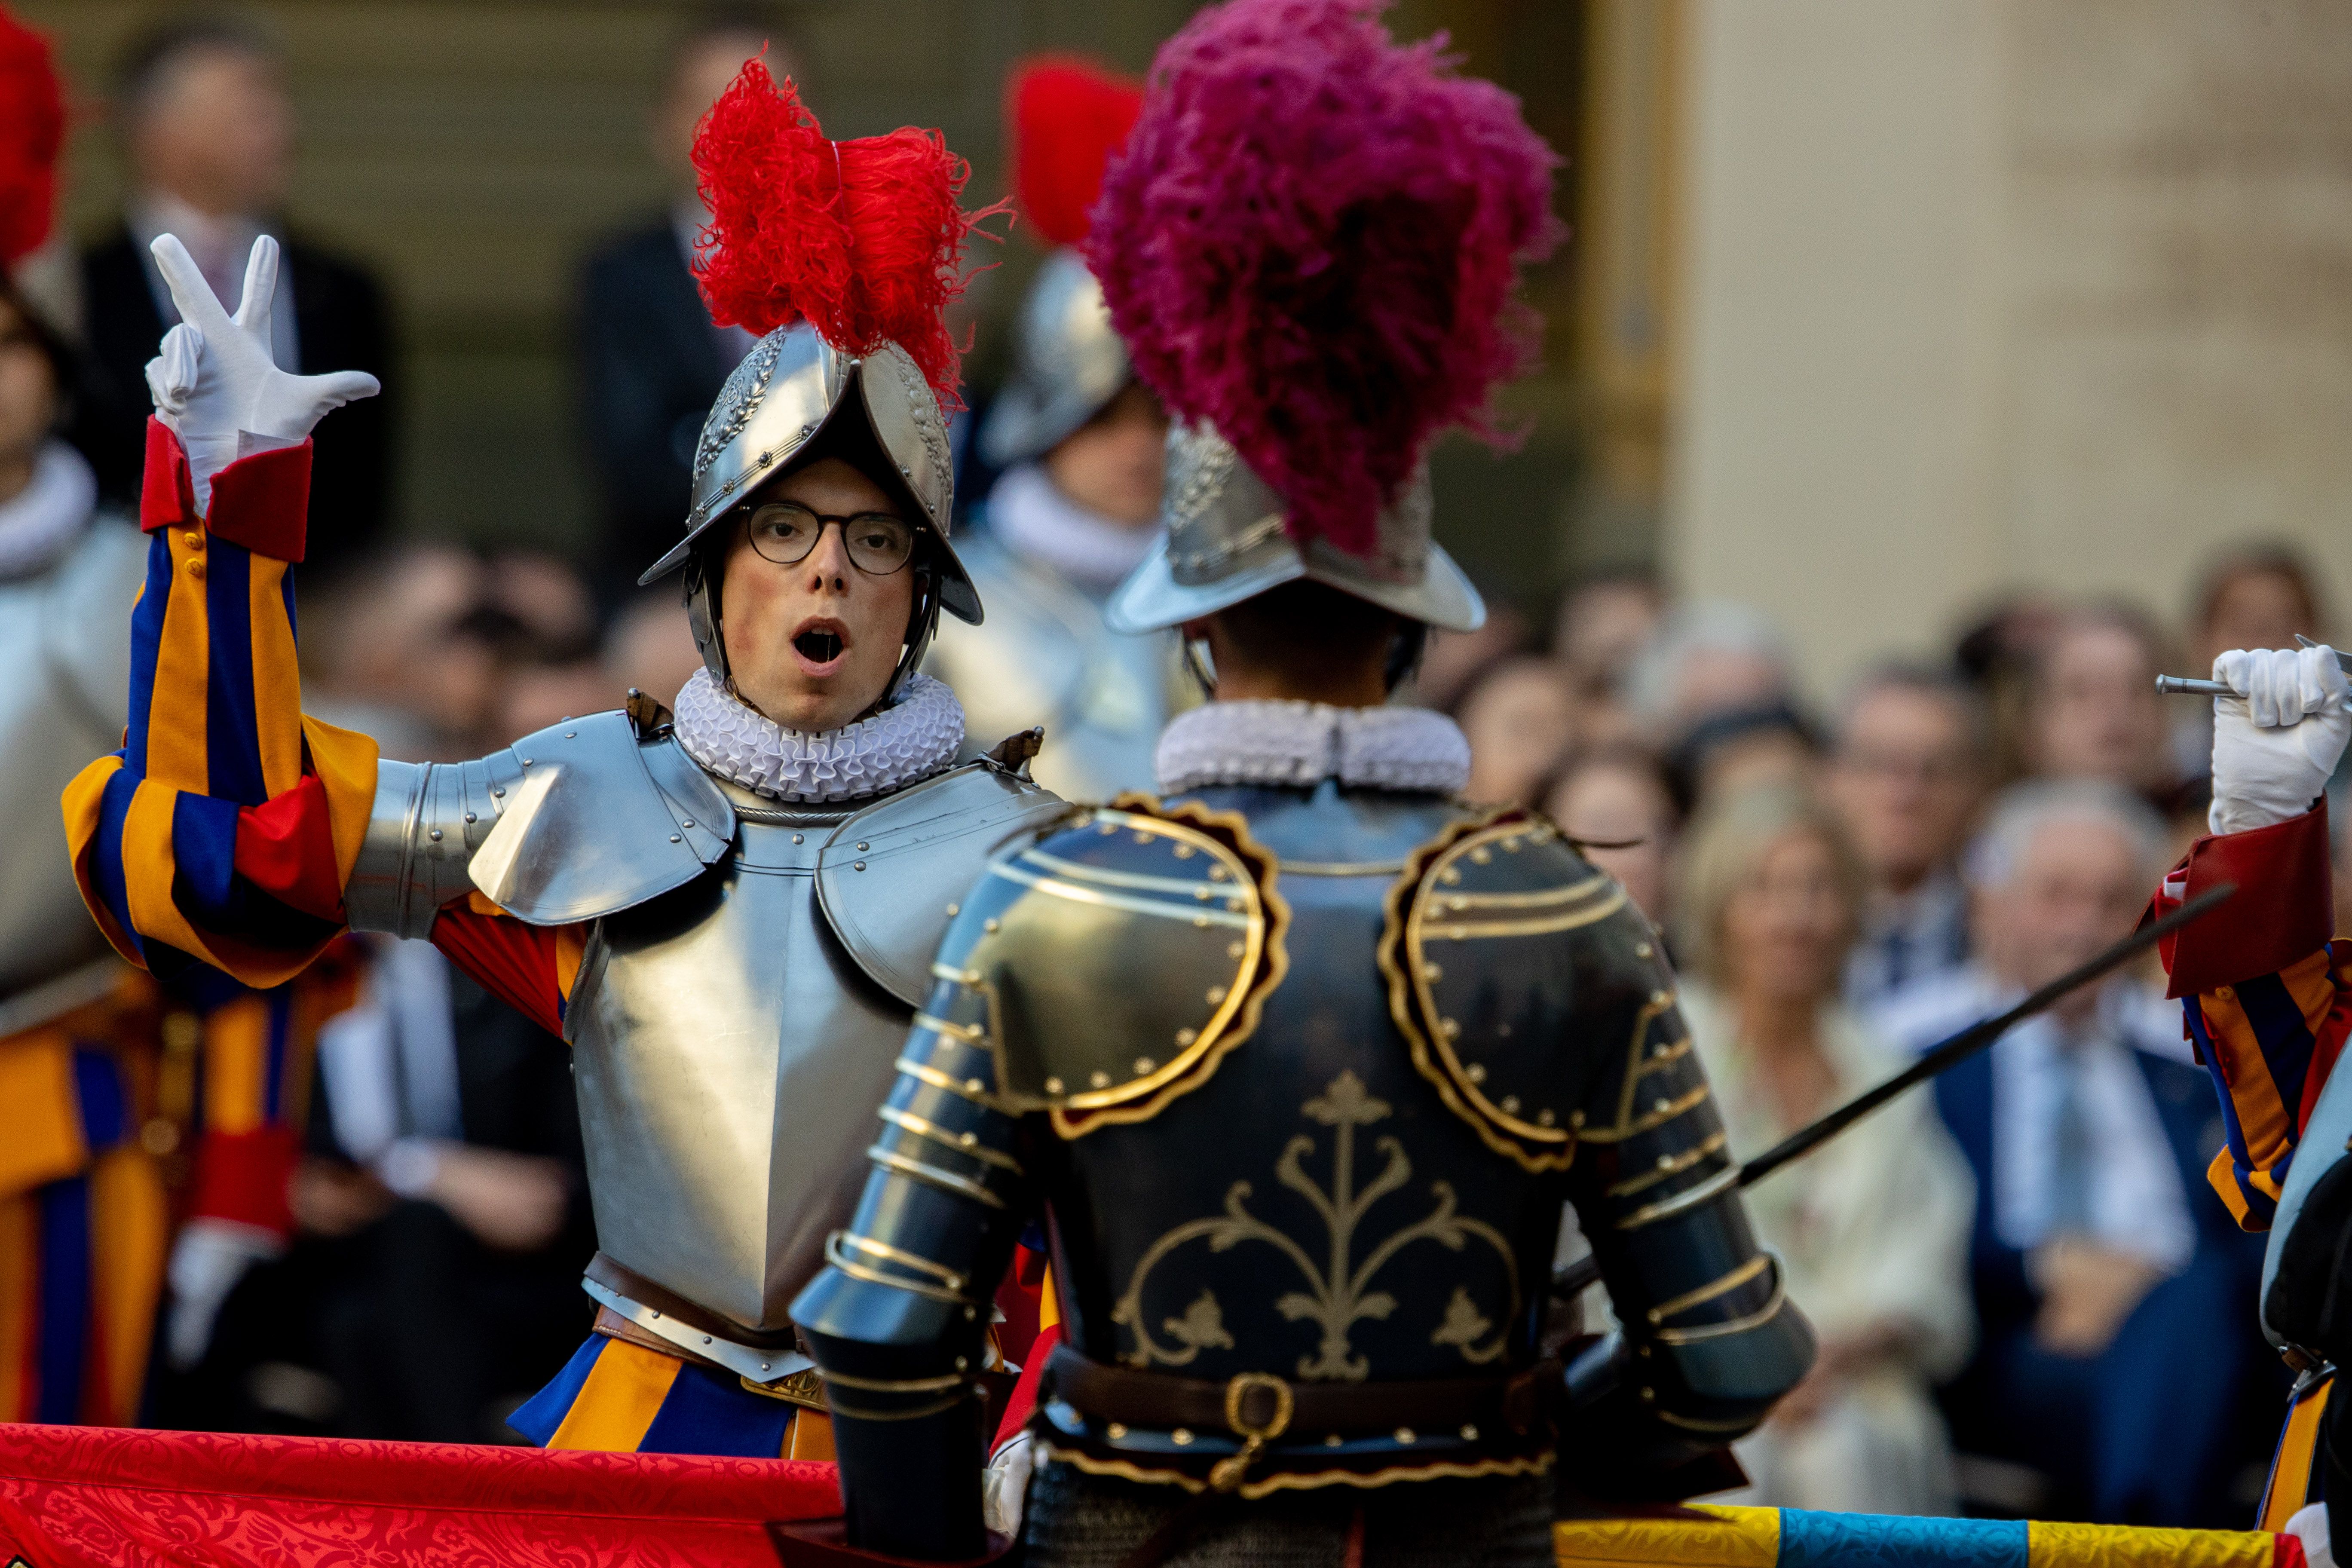 6 things to know about the Swiss Guard and its swearing-in ceremony